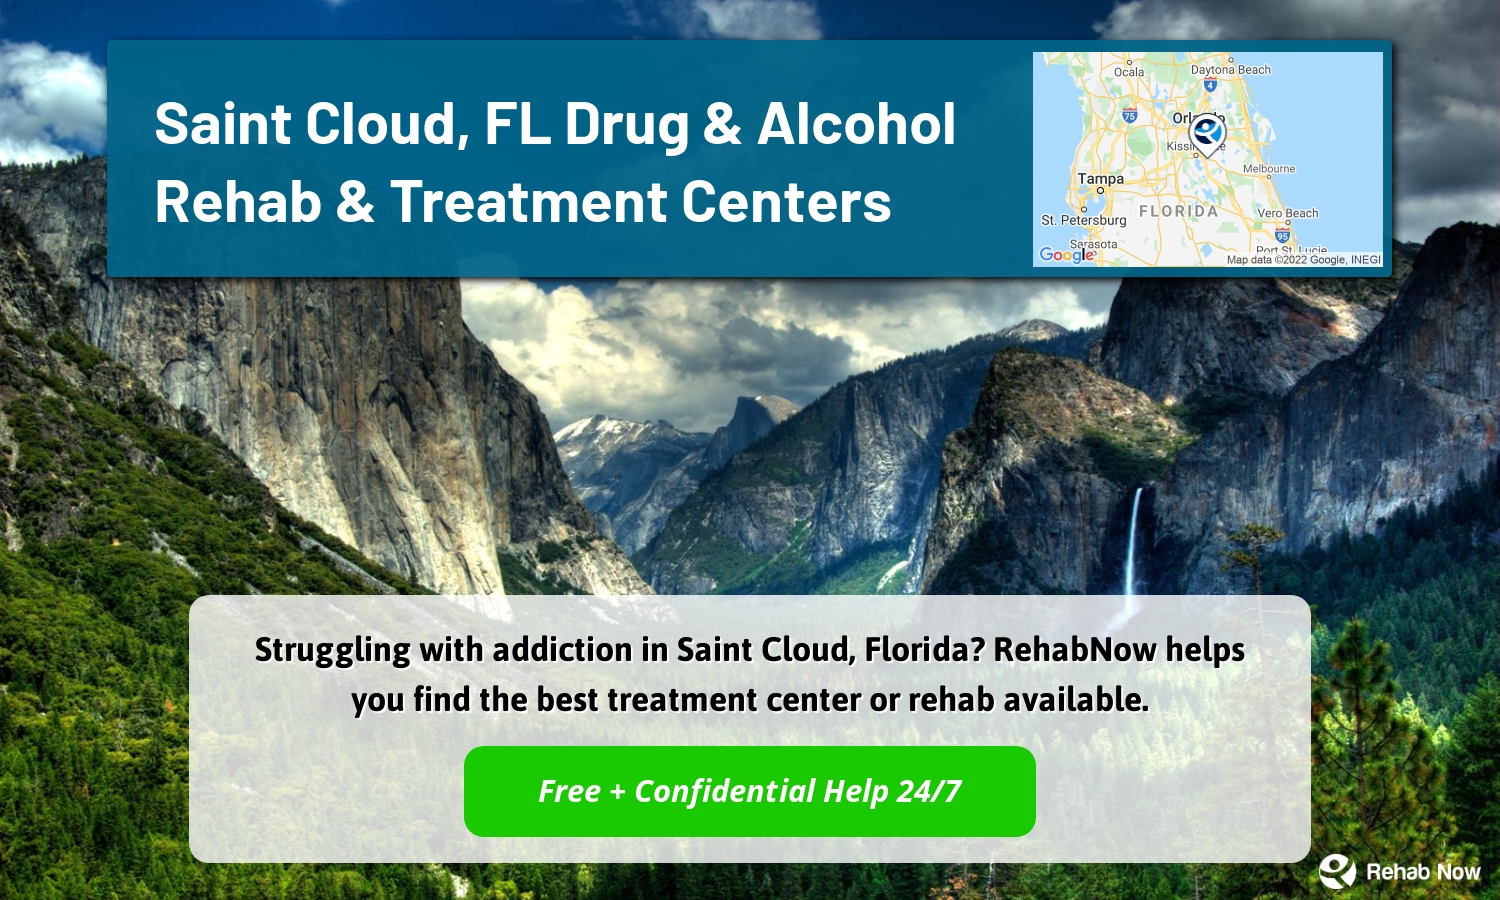 Struggling with addiction in Saint Cloud, Florida? RehabNow helps you find the best treatment center or rehab available.